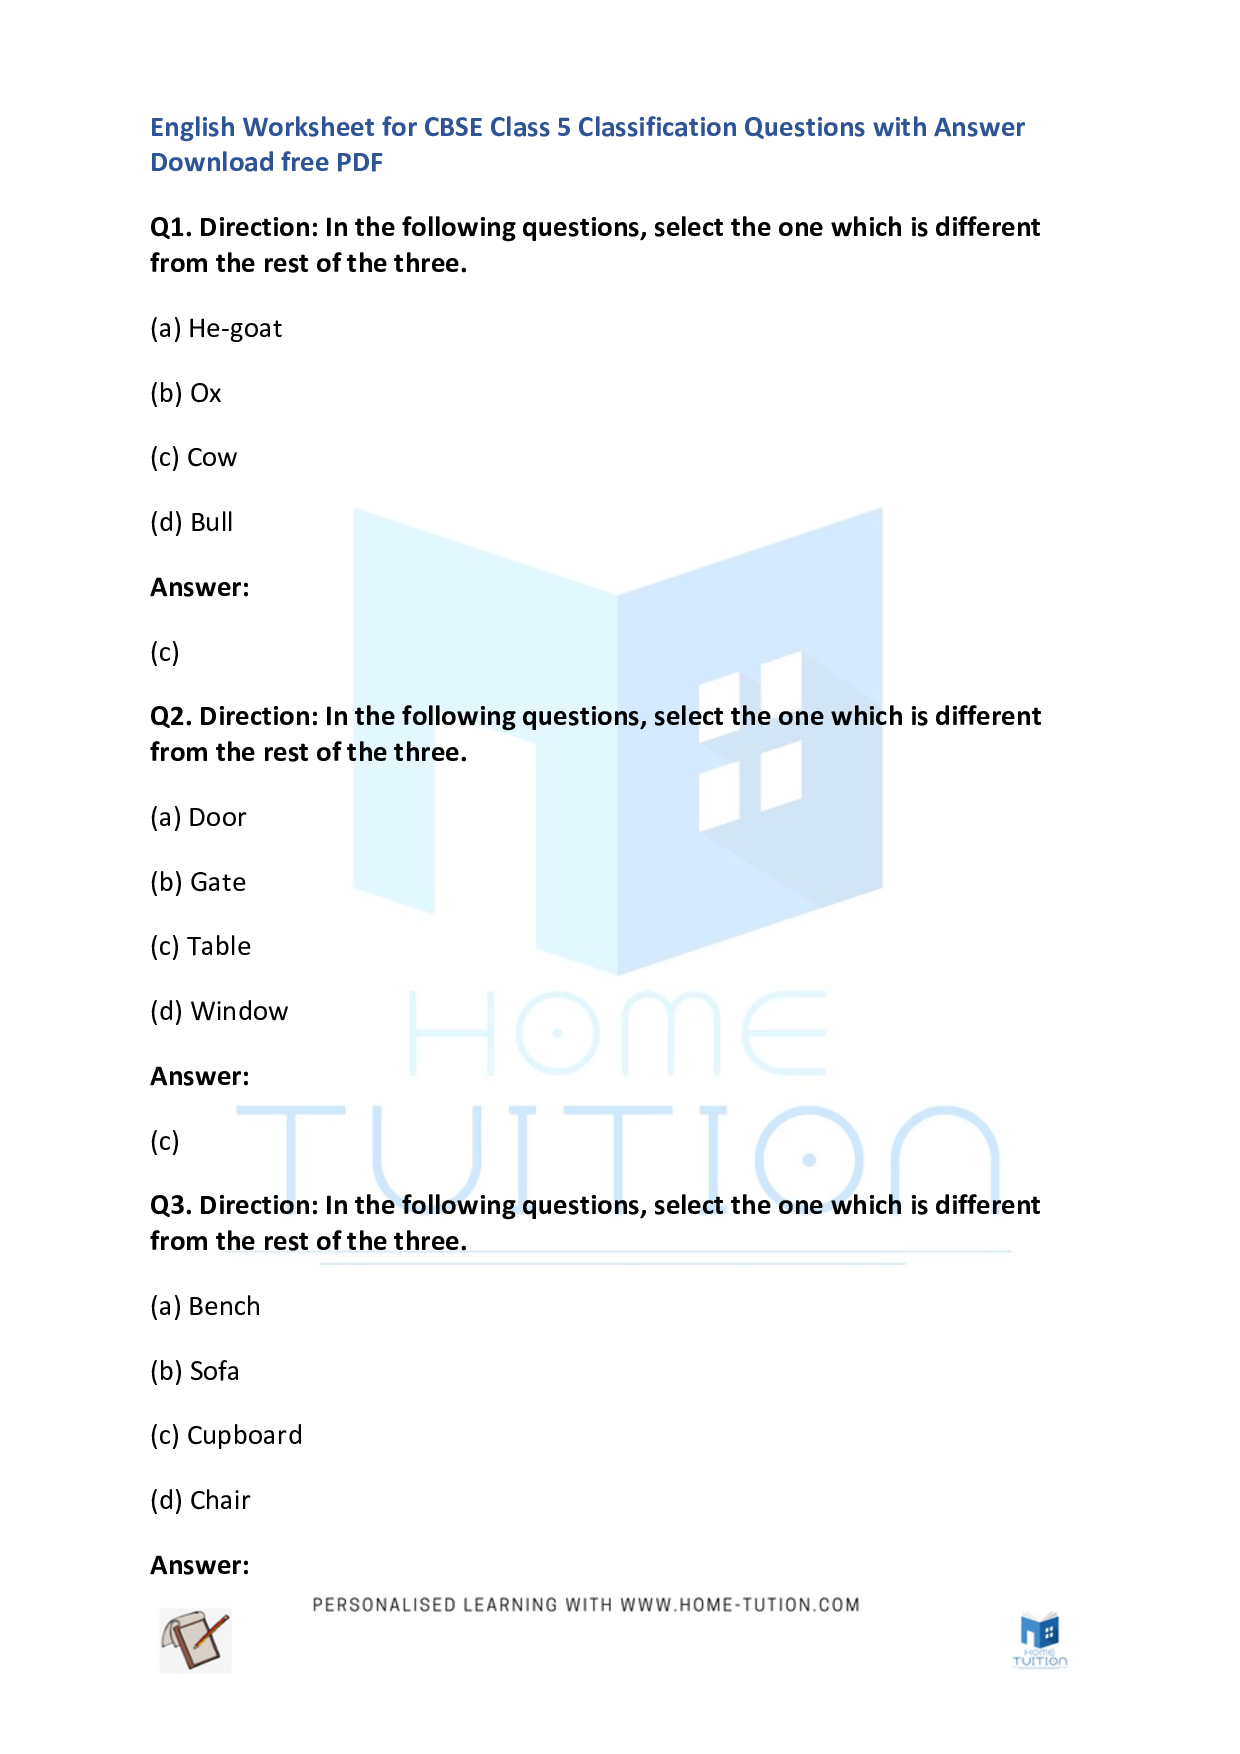 cbse-worksheet-for-class-5-english-classification-free-pdf-home-tution